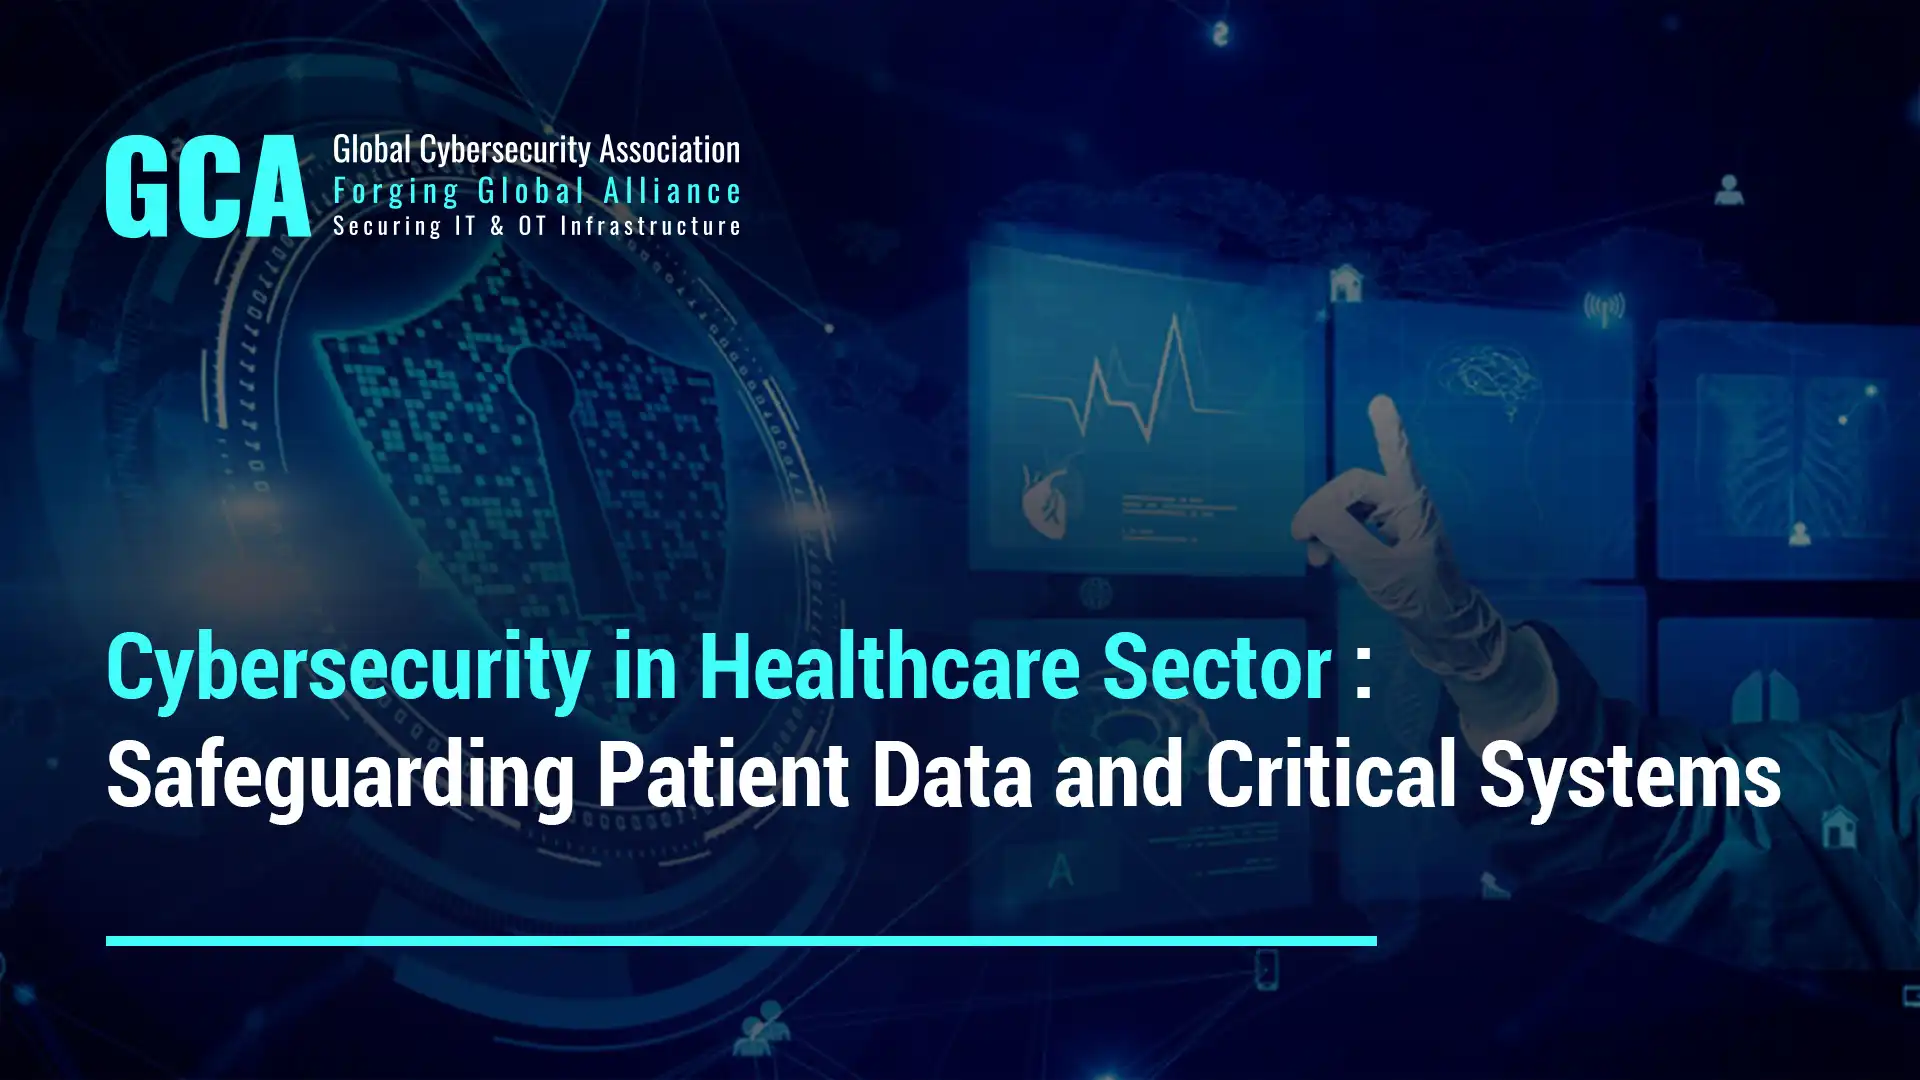 Cybersecurity in Healthcare Sector: Safeguarding Patient Data and Critical Systems